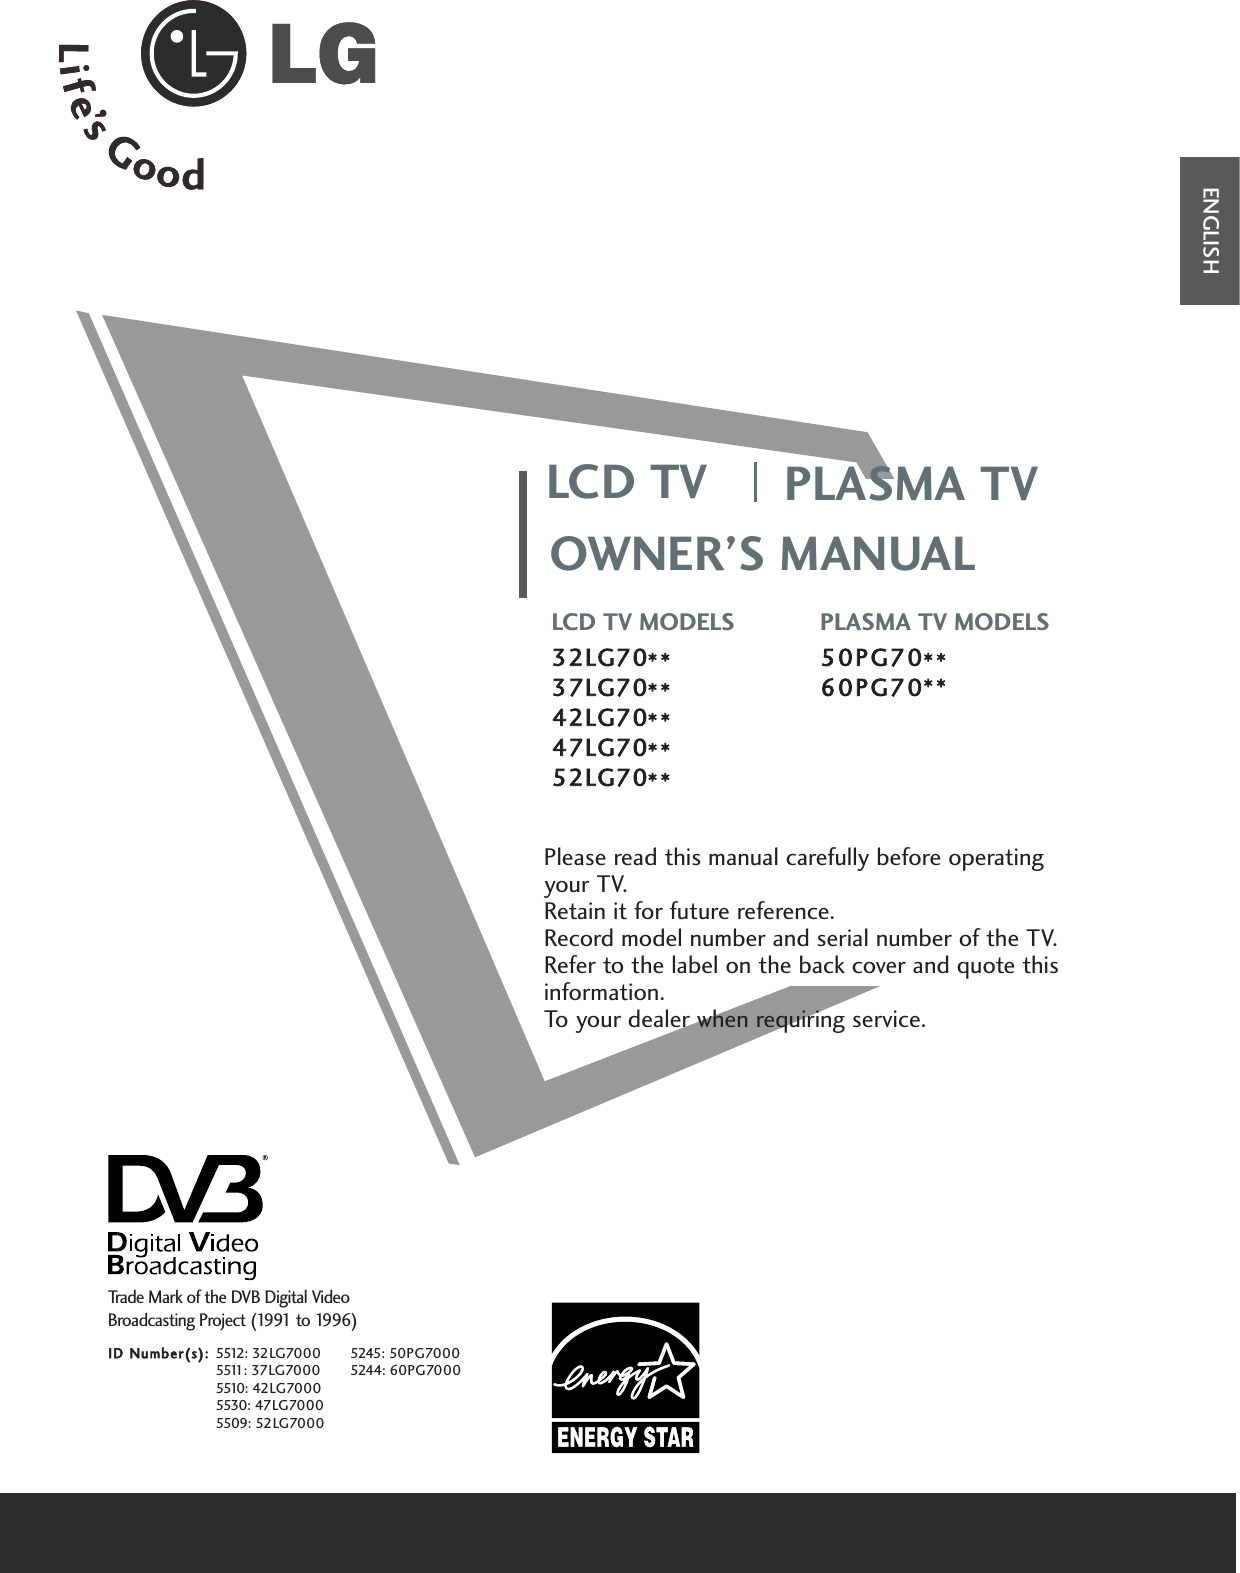 OWNER’S MANUALLCD TV MODELS32LG70**37LG70**42LG70**47LG70**52LG70**PLASMA TV MODELS50PG70**60PG70**LCD TV PLASMA TVPlease read this manual carefully before operatingyour TV. Retain it for future reference.Record model number and serial number of the TV. Refer to the label on the back cover and quote thisinformation.To your dealer when requiring service.ENGLISHTrade Mark of the DVB Digital Video Broadcasting Project (1991 to 1996)ID Number(s):5512: 32LG70005511: 37LG70005510: 42LG70005530: 47LG70005509: 52LG70005245: 50PG70005244: 60PG7000